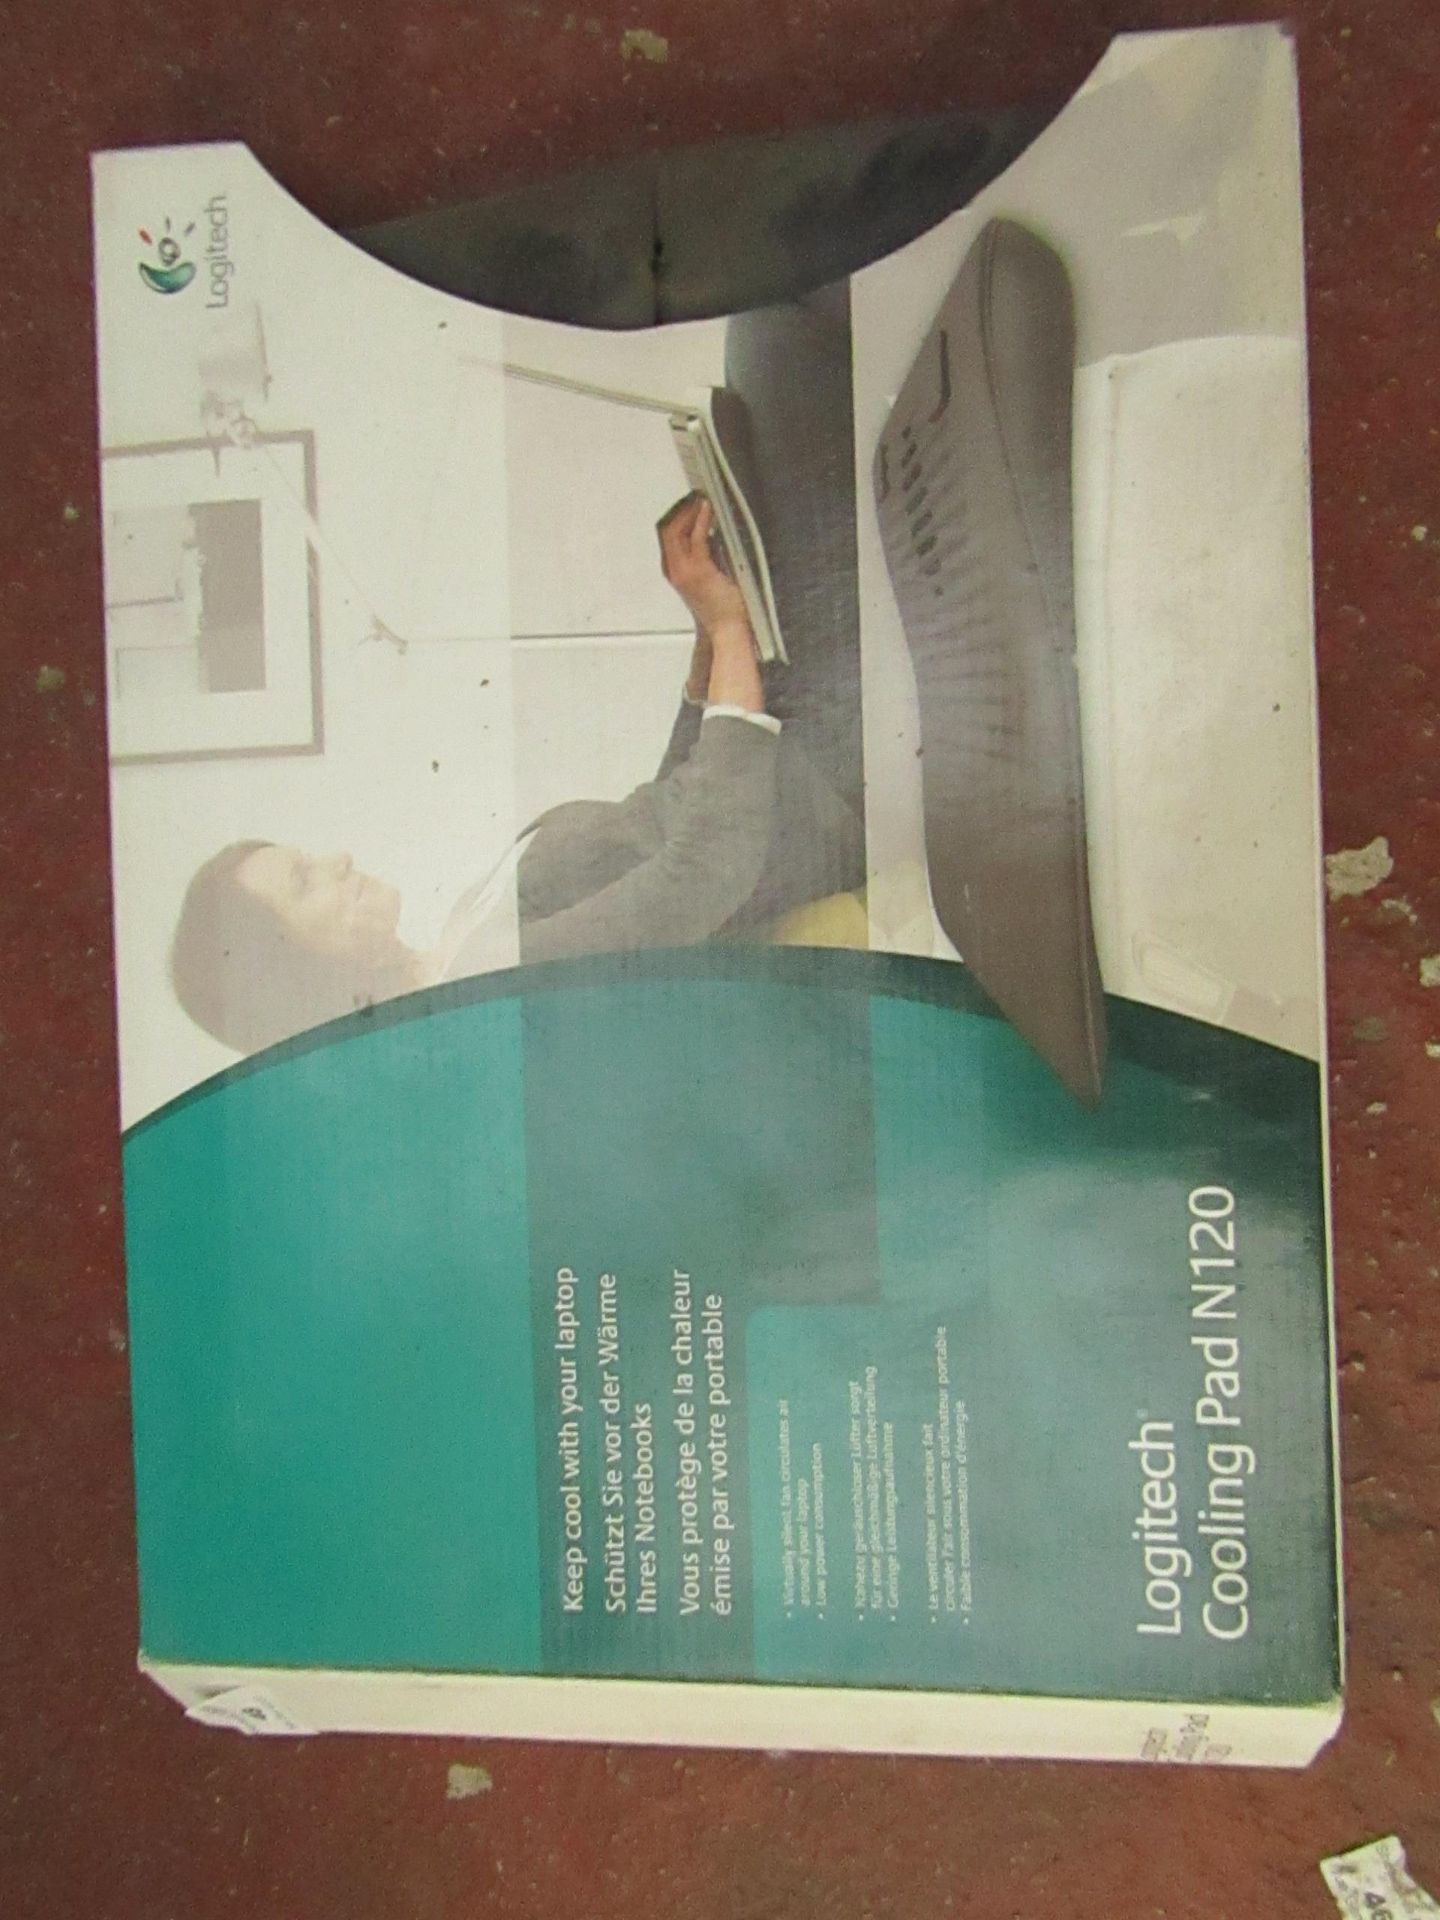 Logitech - Cooling Pad N120 - Untested and boxed.